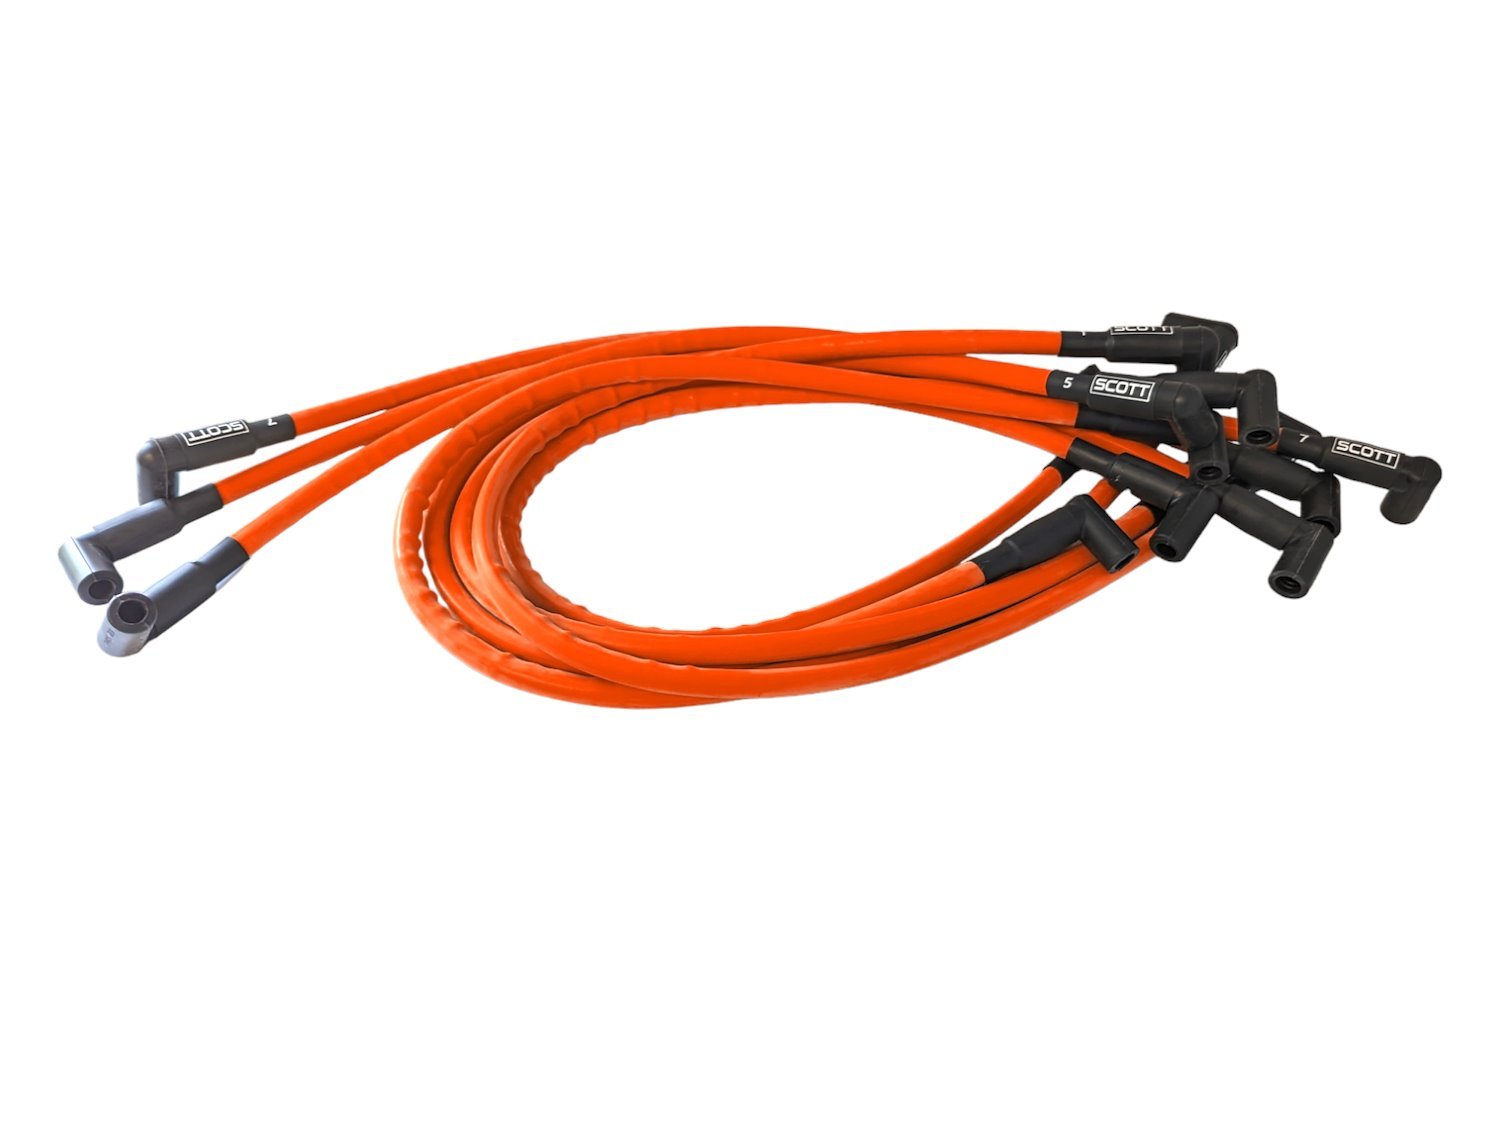 SPW-CH-407-9 High-Performance Silicone-Sleeved Spark Plug Wire Set for Small Block Chevy, Under Header [Fluorescent Orange]